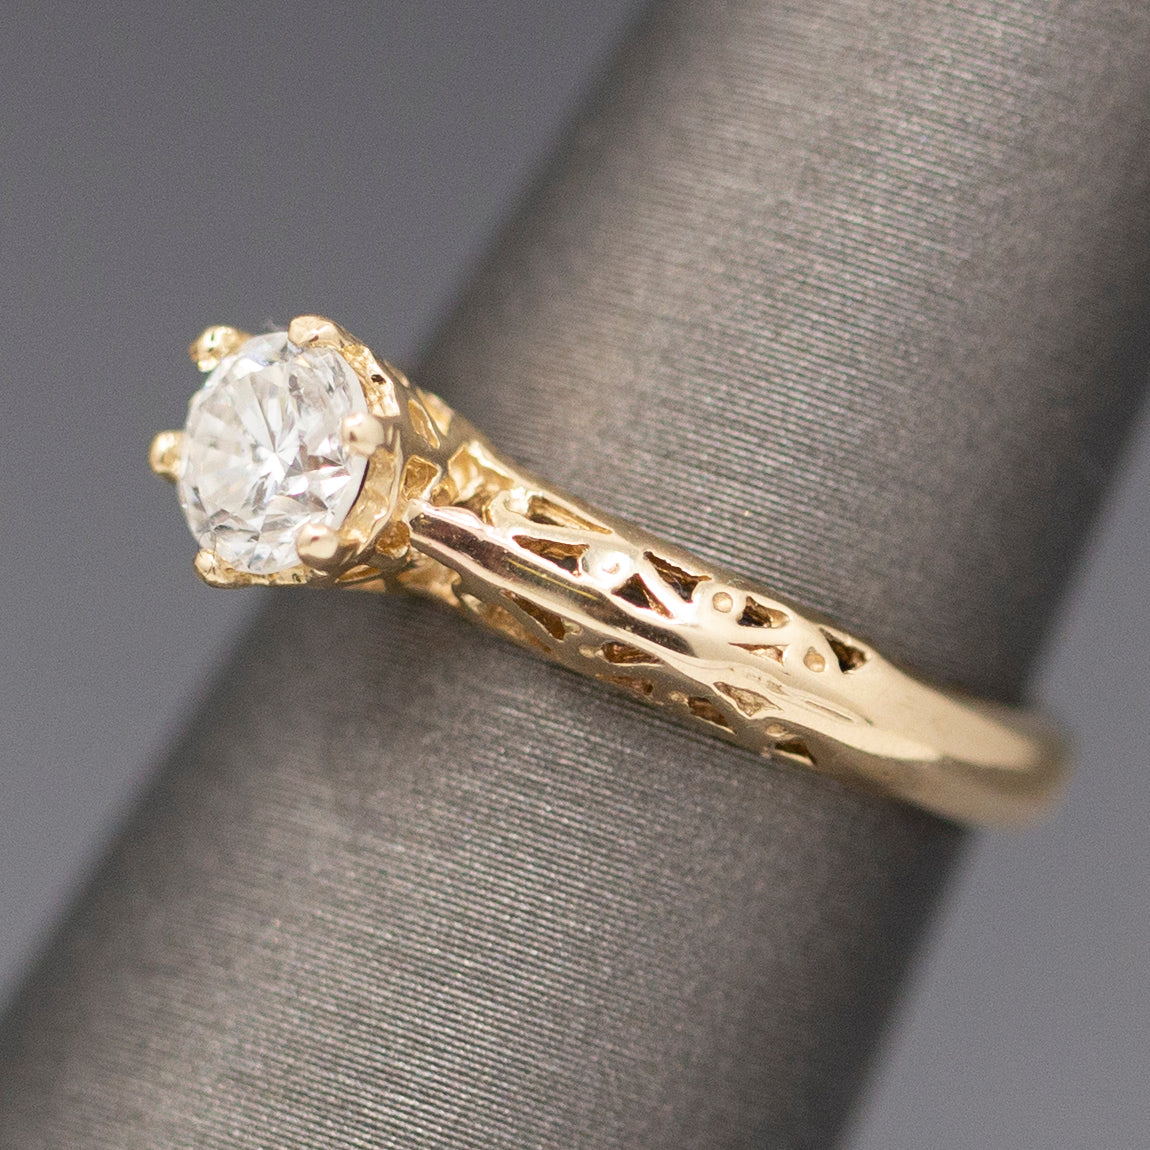 Sparkling Earth Mined Diamond Solitaire Pierced Crown Engagement Ring in 14k Yellow Gold